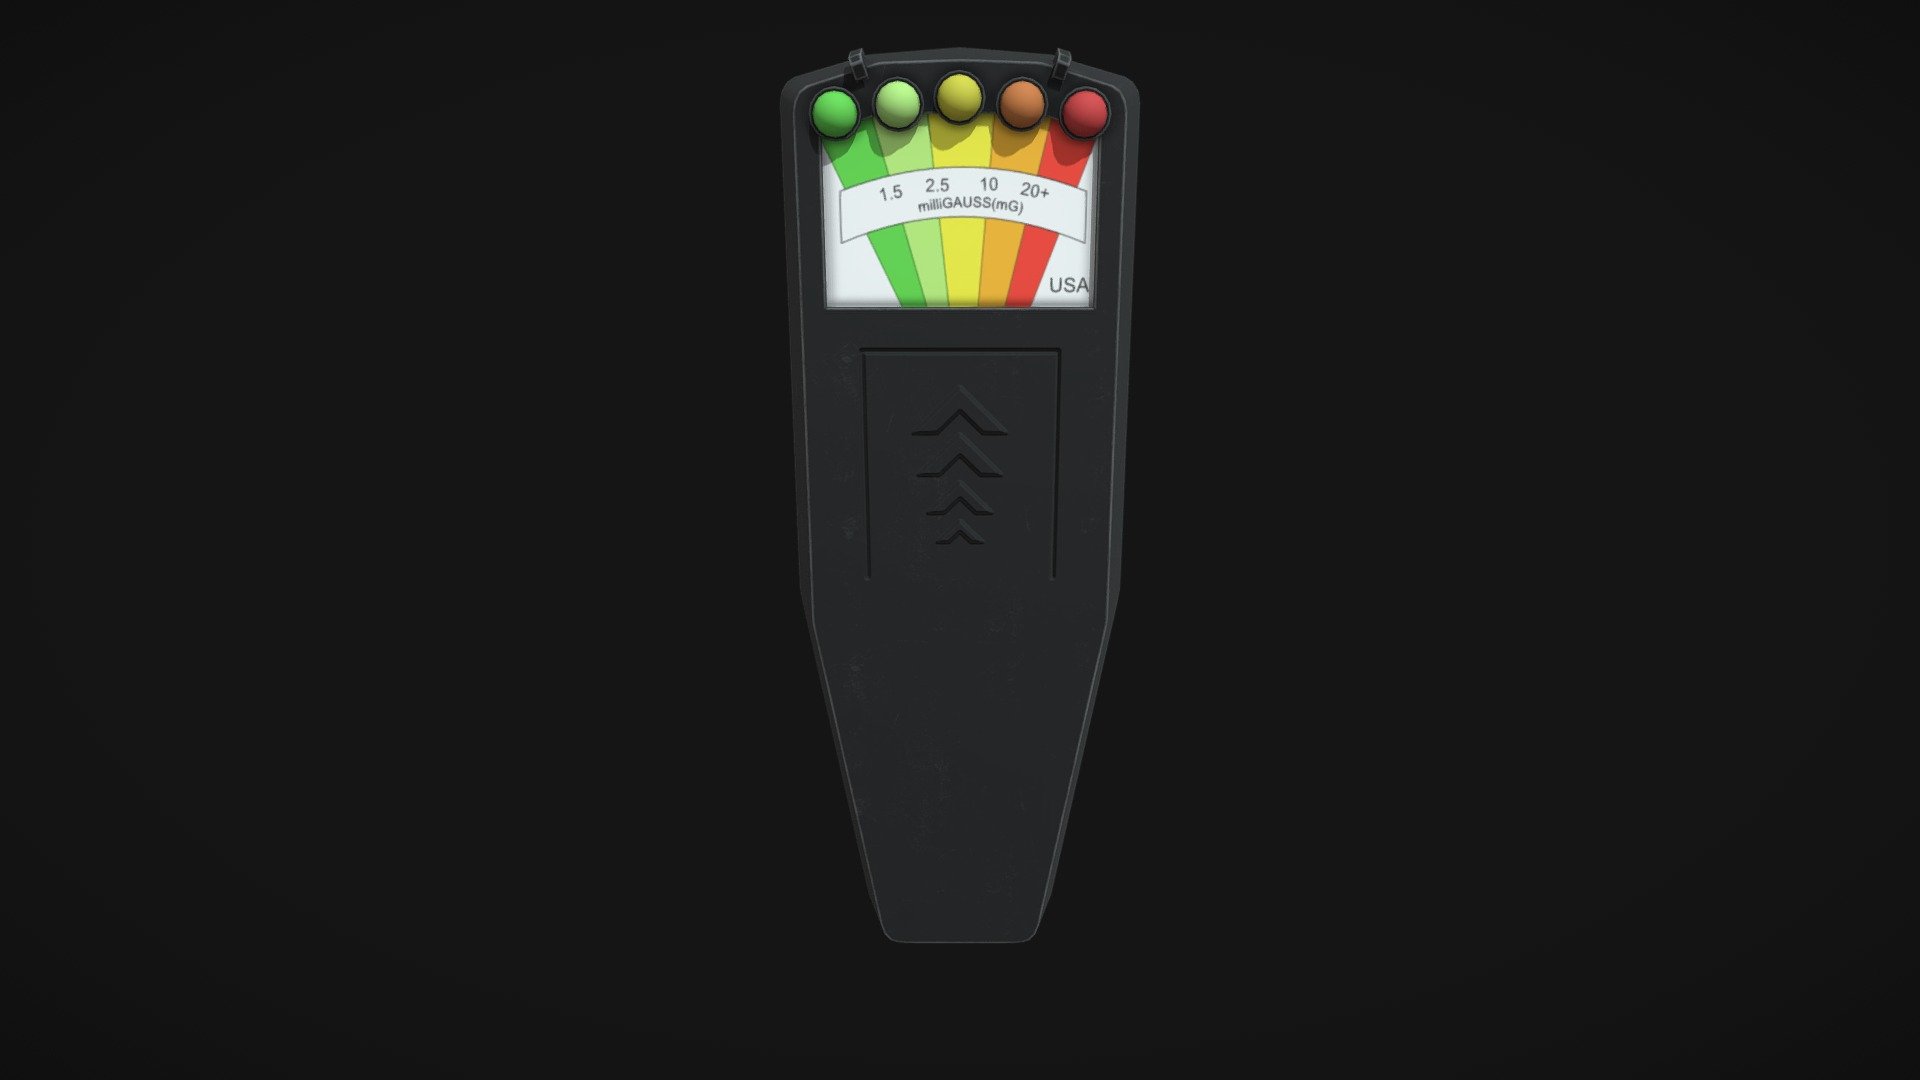 93a31297114b41d599fc96ae73d0770f - You, Me And Breathalyzers: The Truth